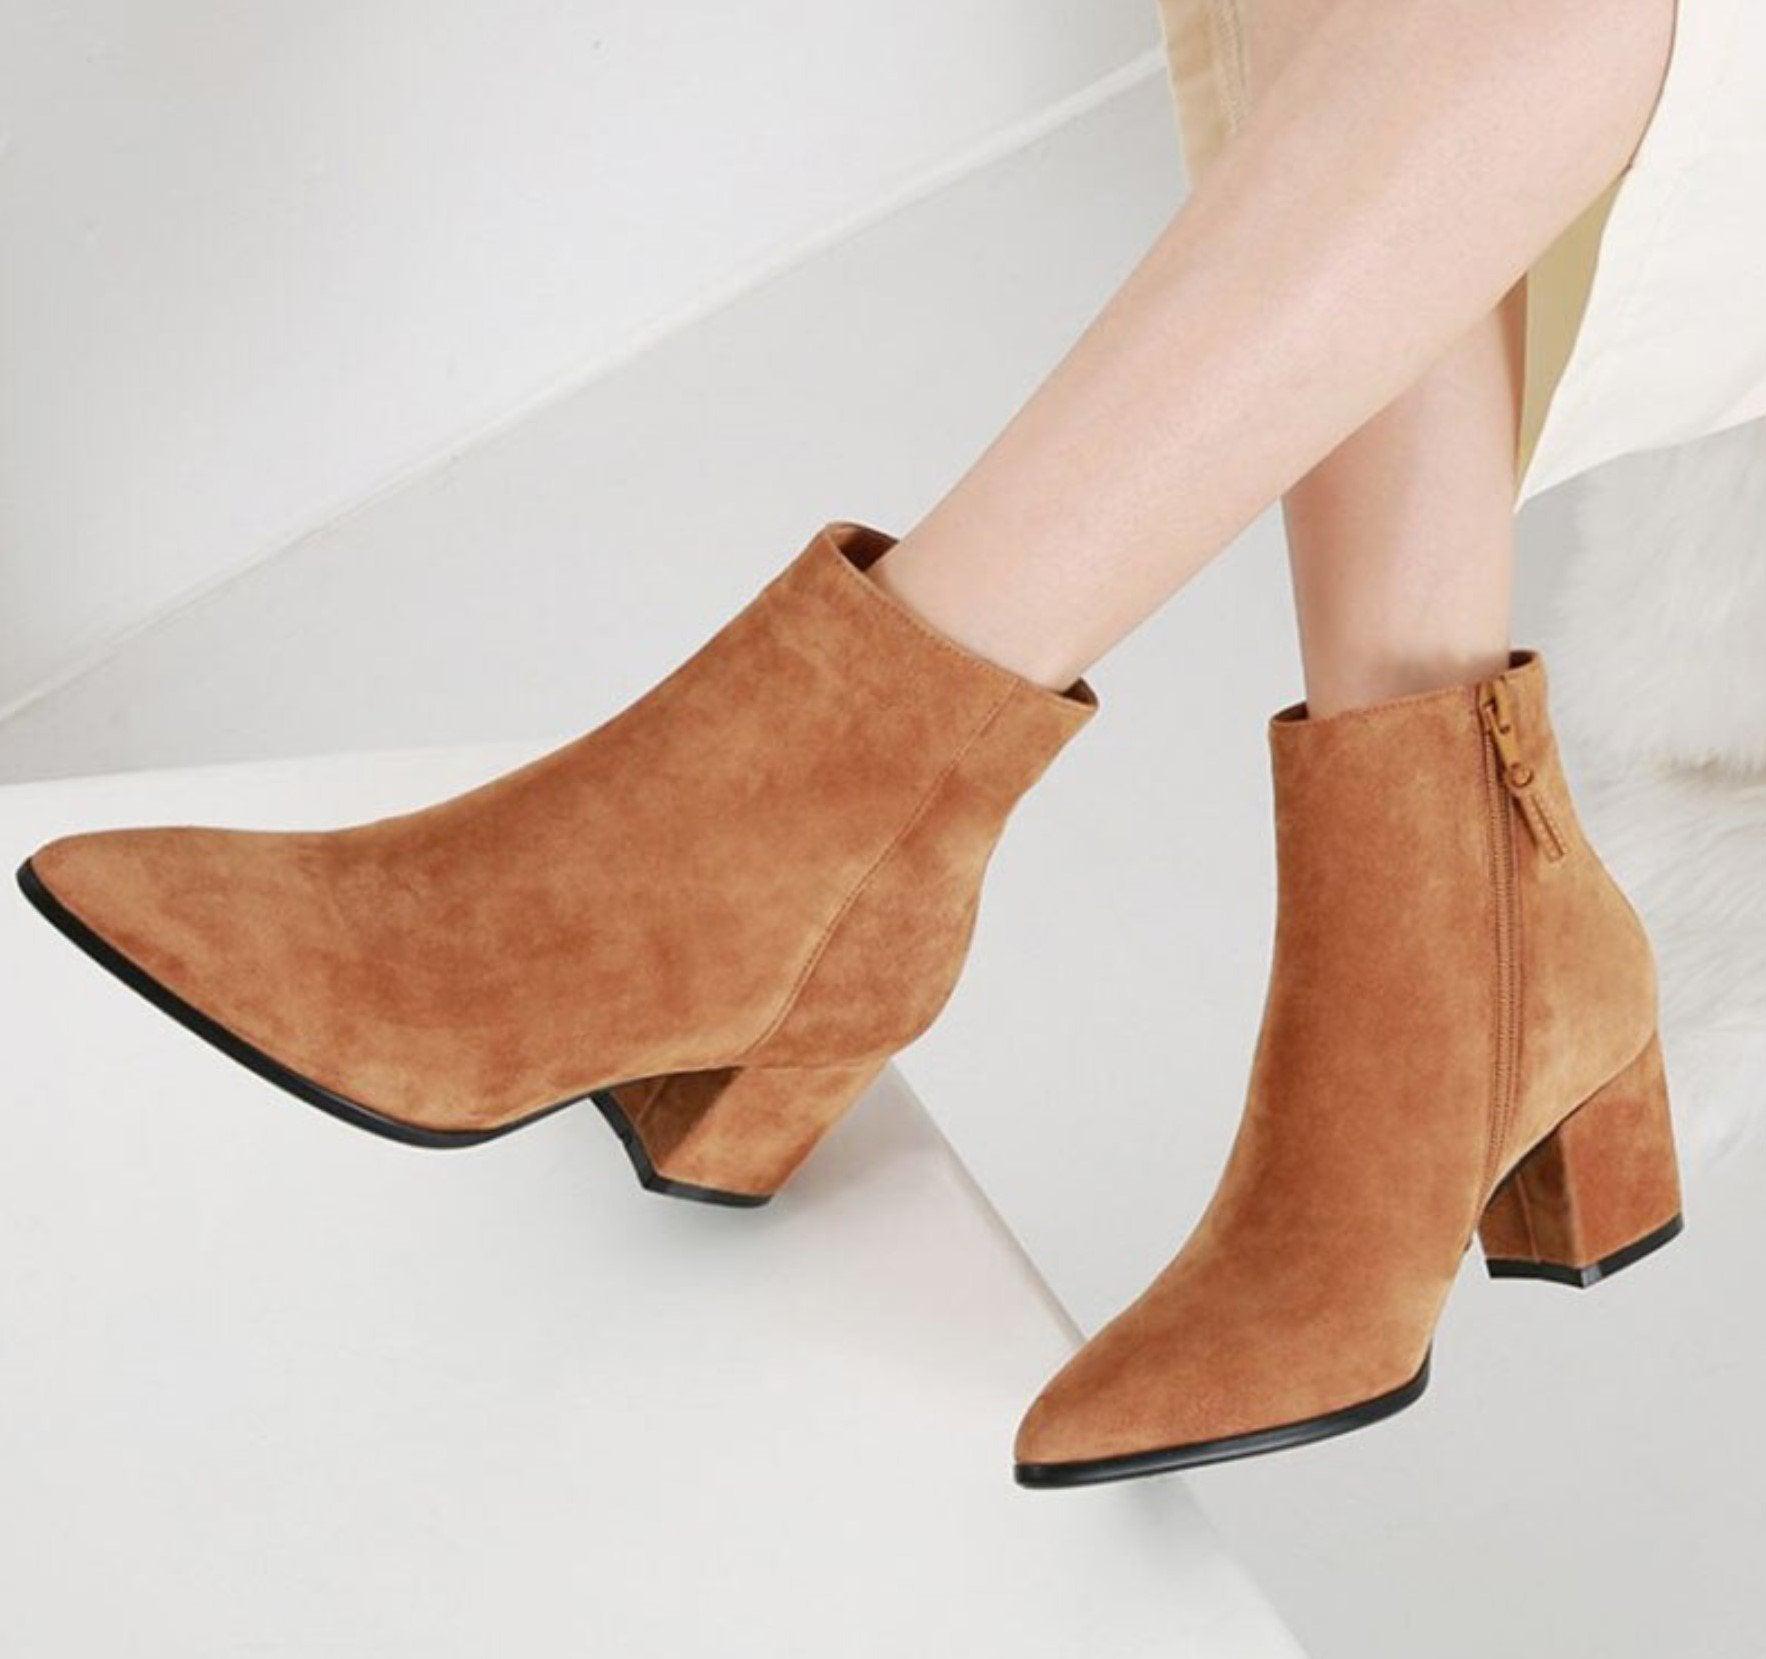 Pointed Toe Suede Ankle Boots